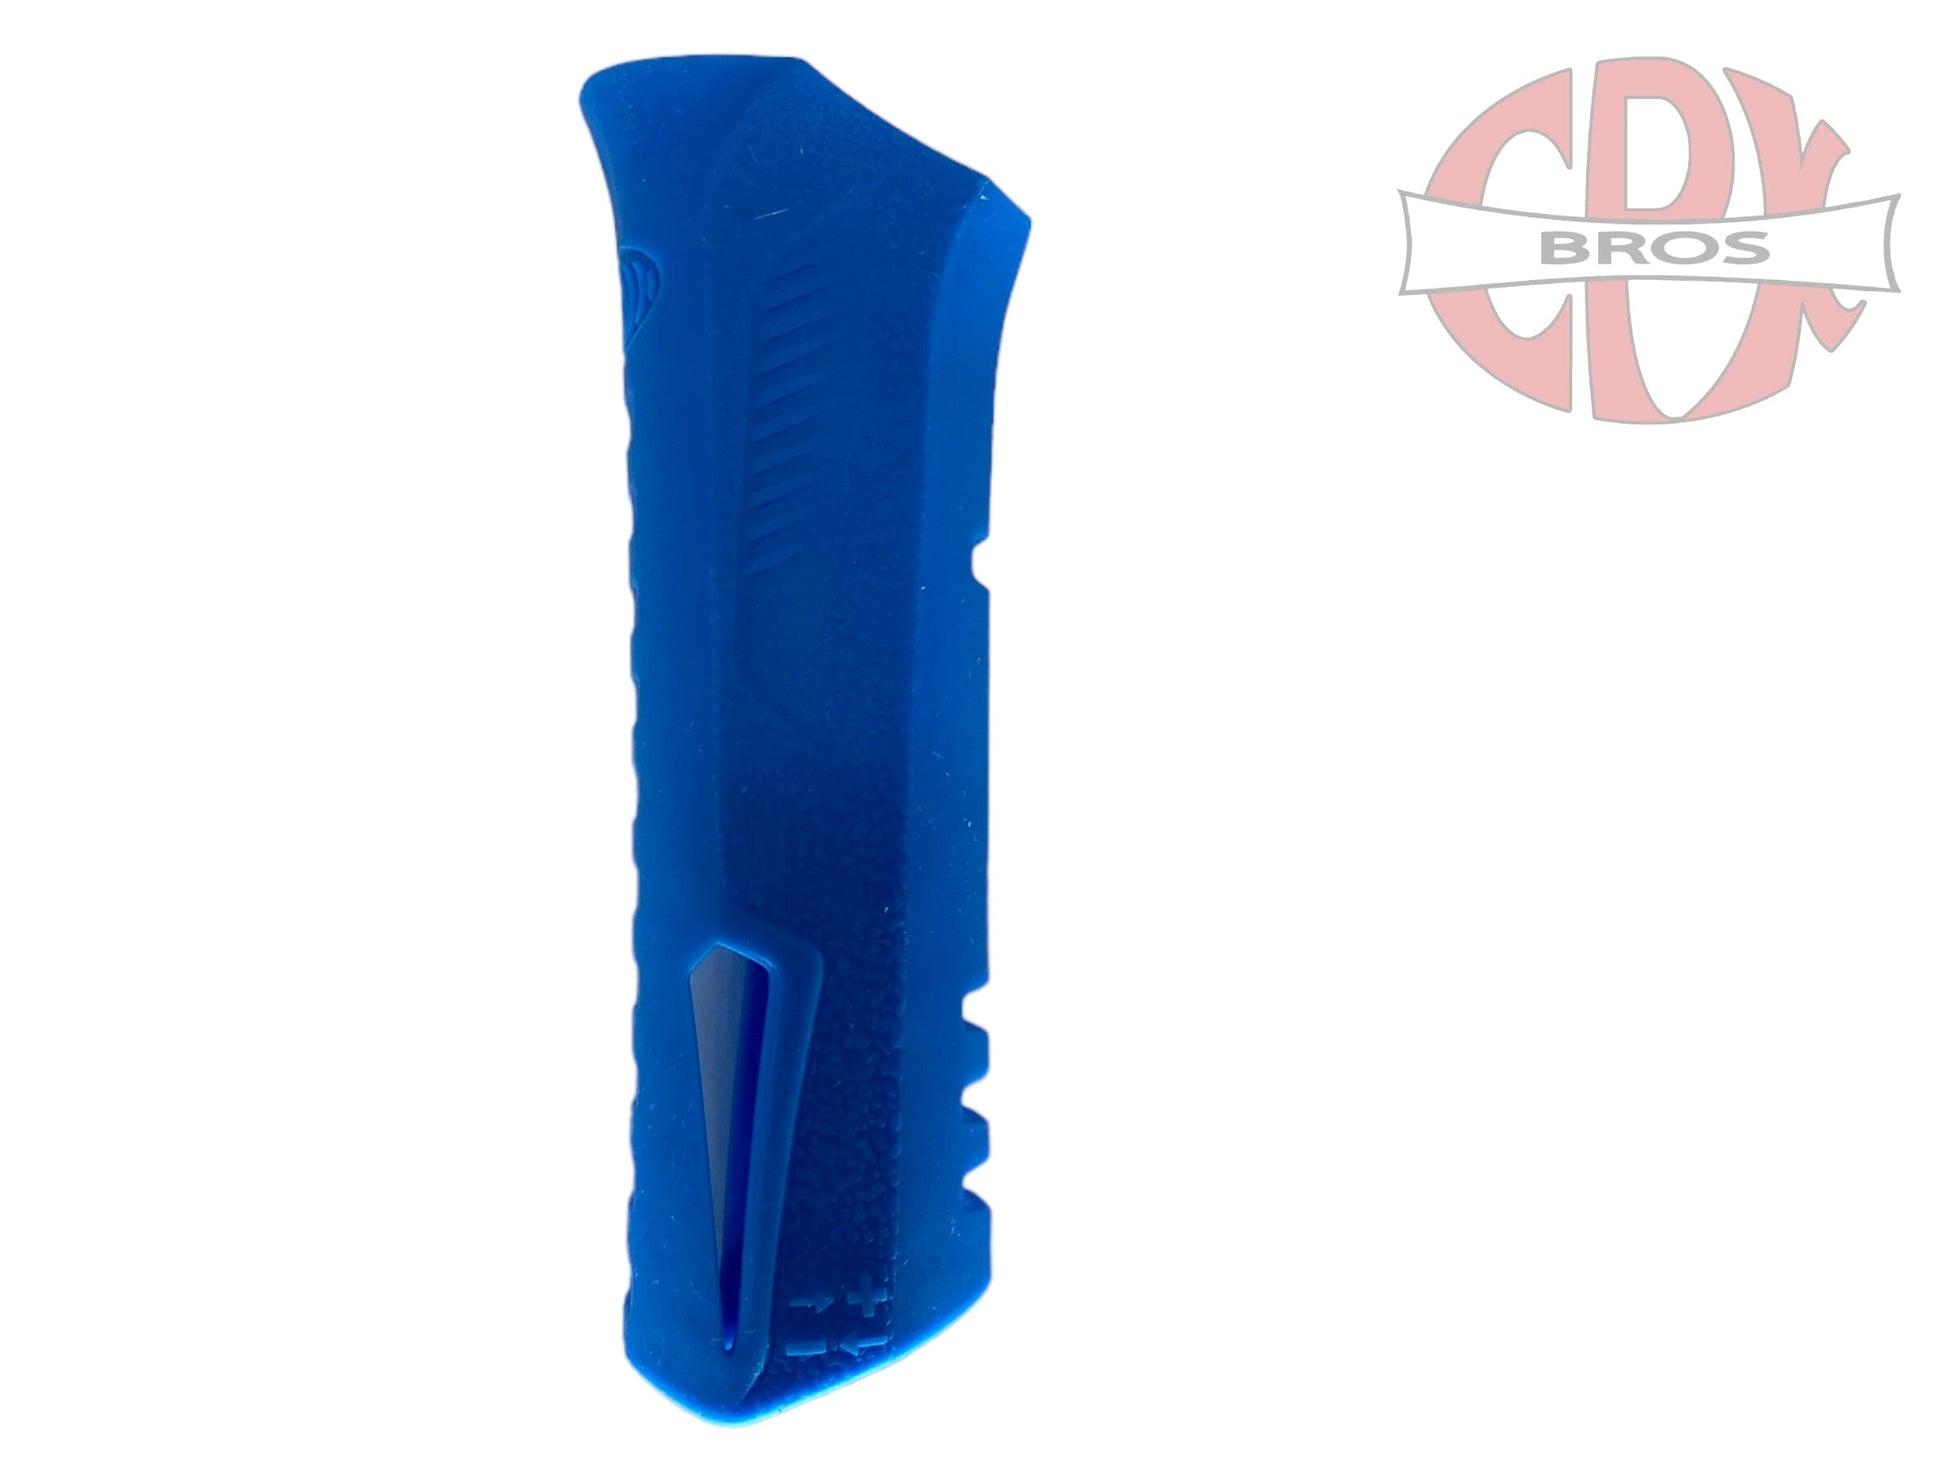 Used SP Shocker RSX/XLS Rubber Front Grip - Blue Paintball Gun from CPXBrosPaintball Buy/Sell/Trade Paintball Markers, Paintball Hoppers, Paintball Masks, and Hormesis Headbands